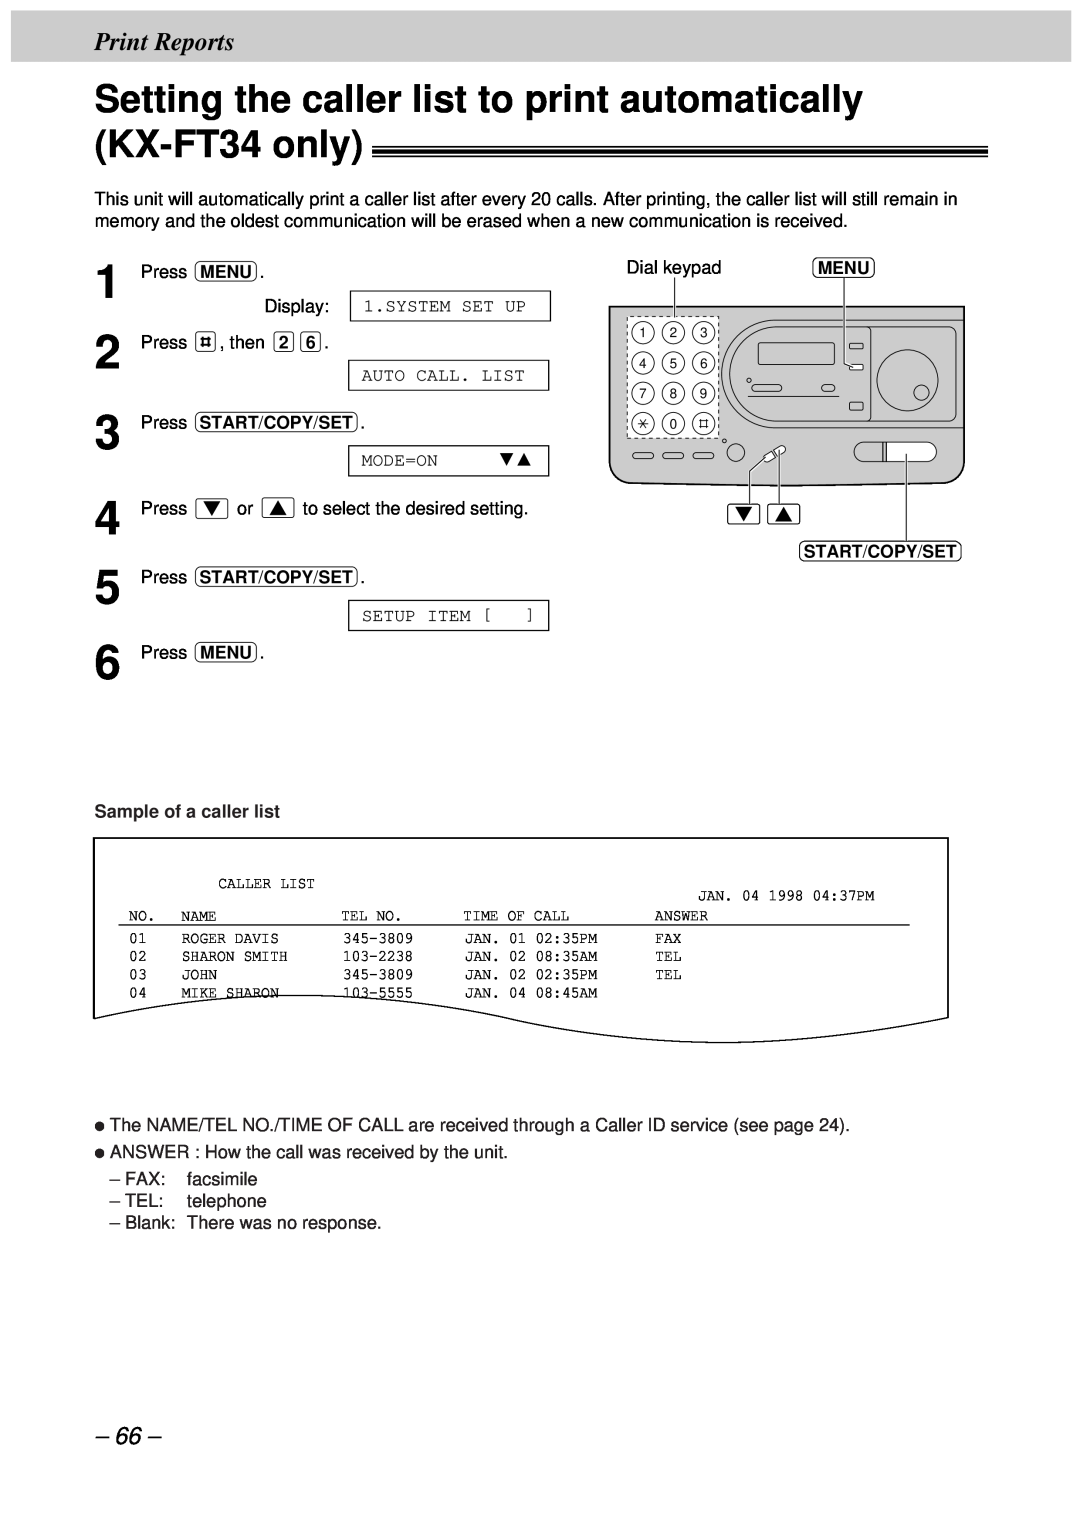 Panasonic KX-FT33HK, KX-FT34HK quick start Setting the caller list to print automatically KX-FT34 only, Print Reports 